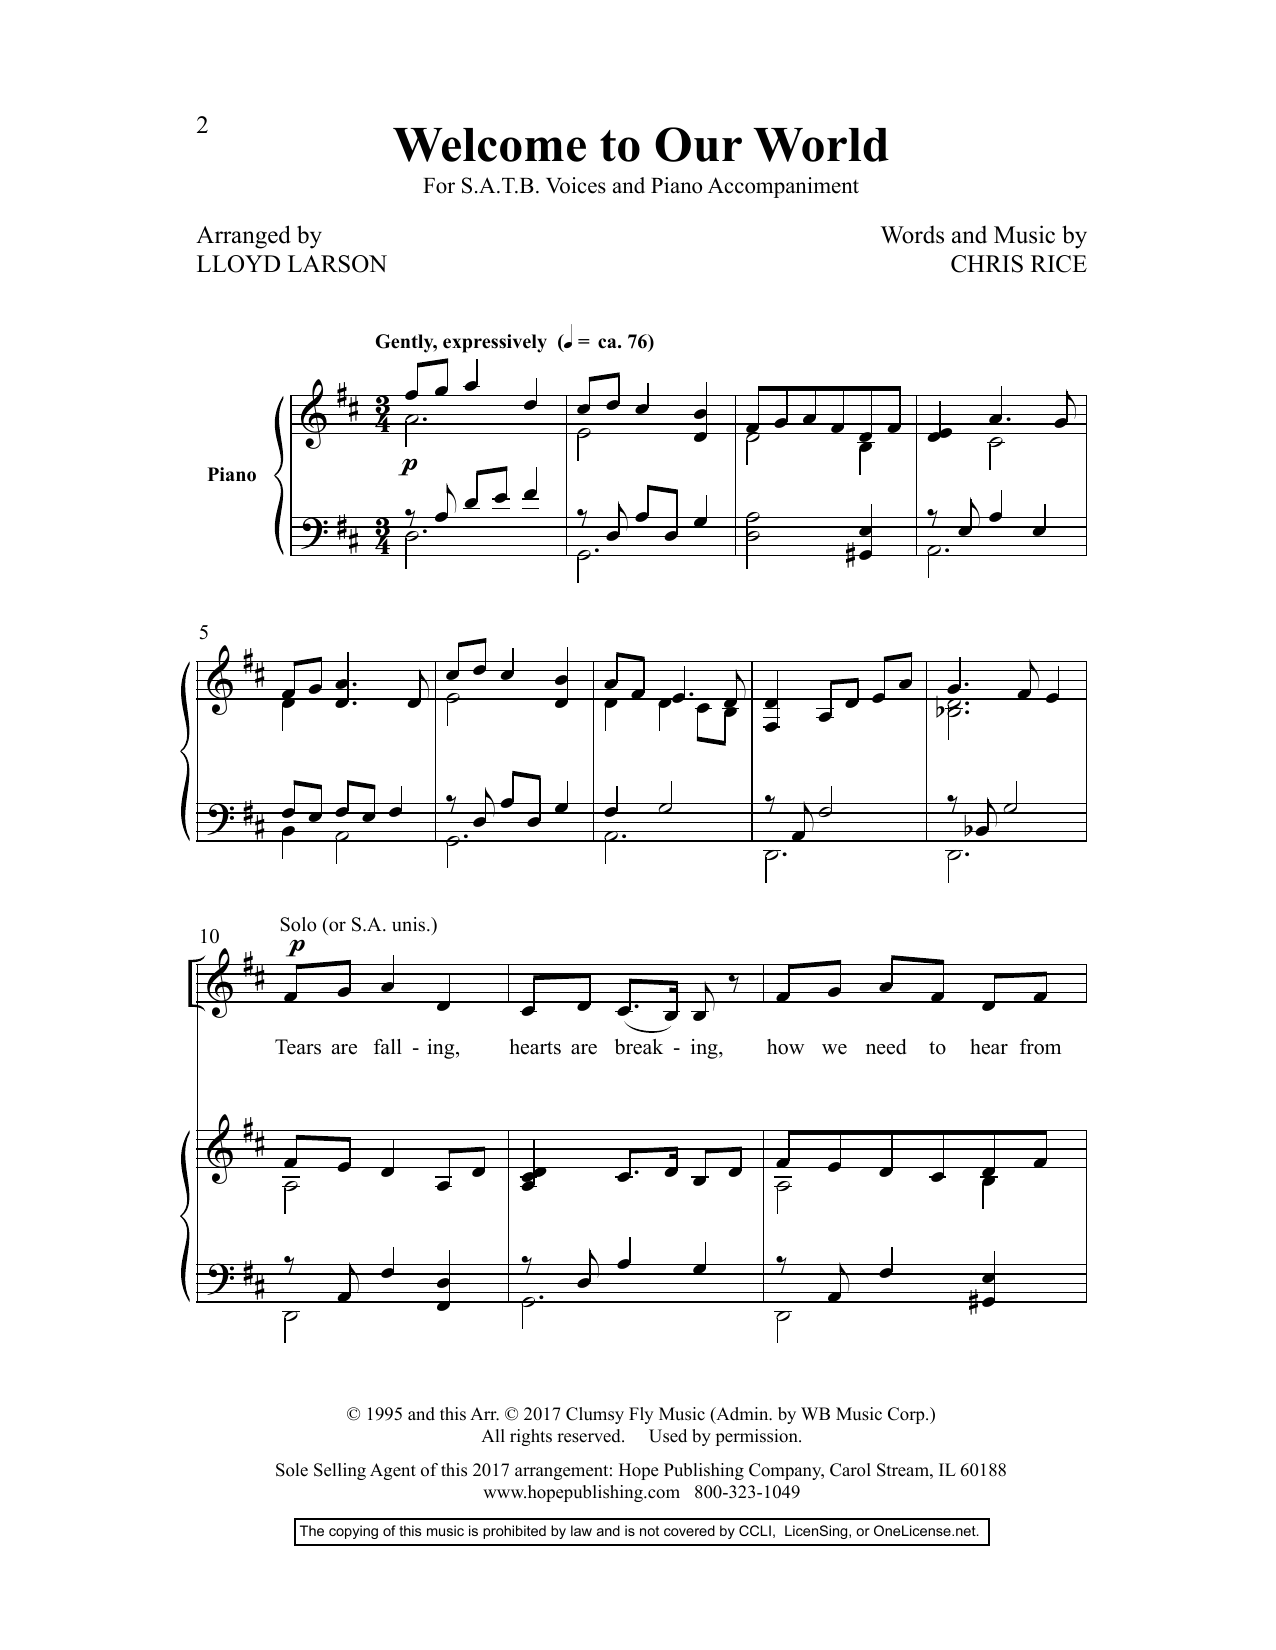 Download Chris Rice Welcome to Our World (arr. Lloyd Larson Sheet Music